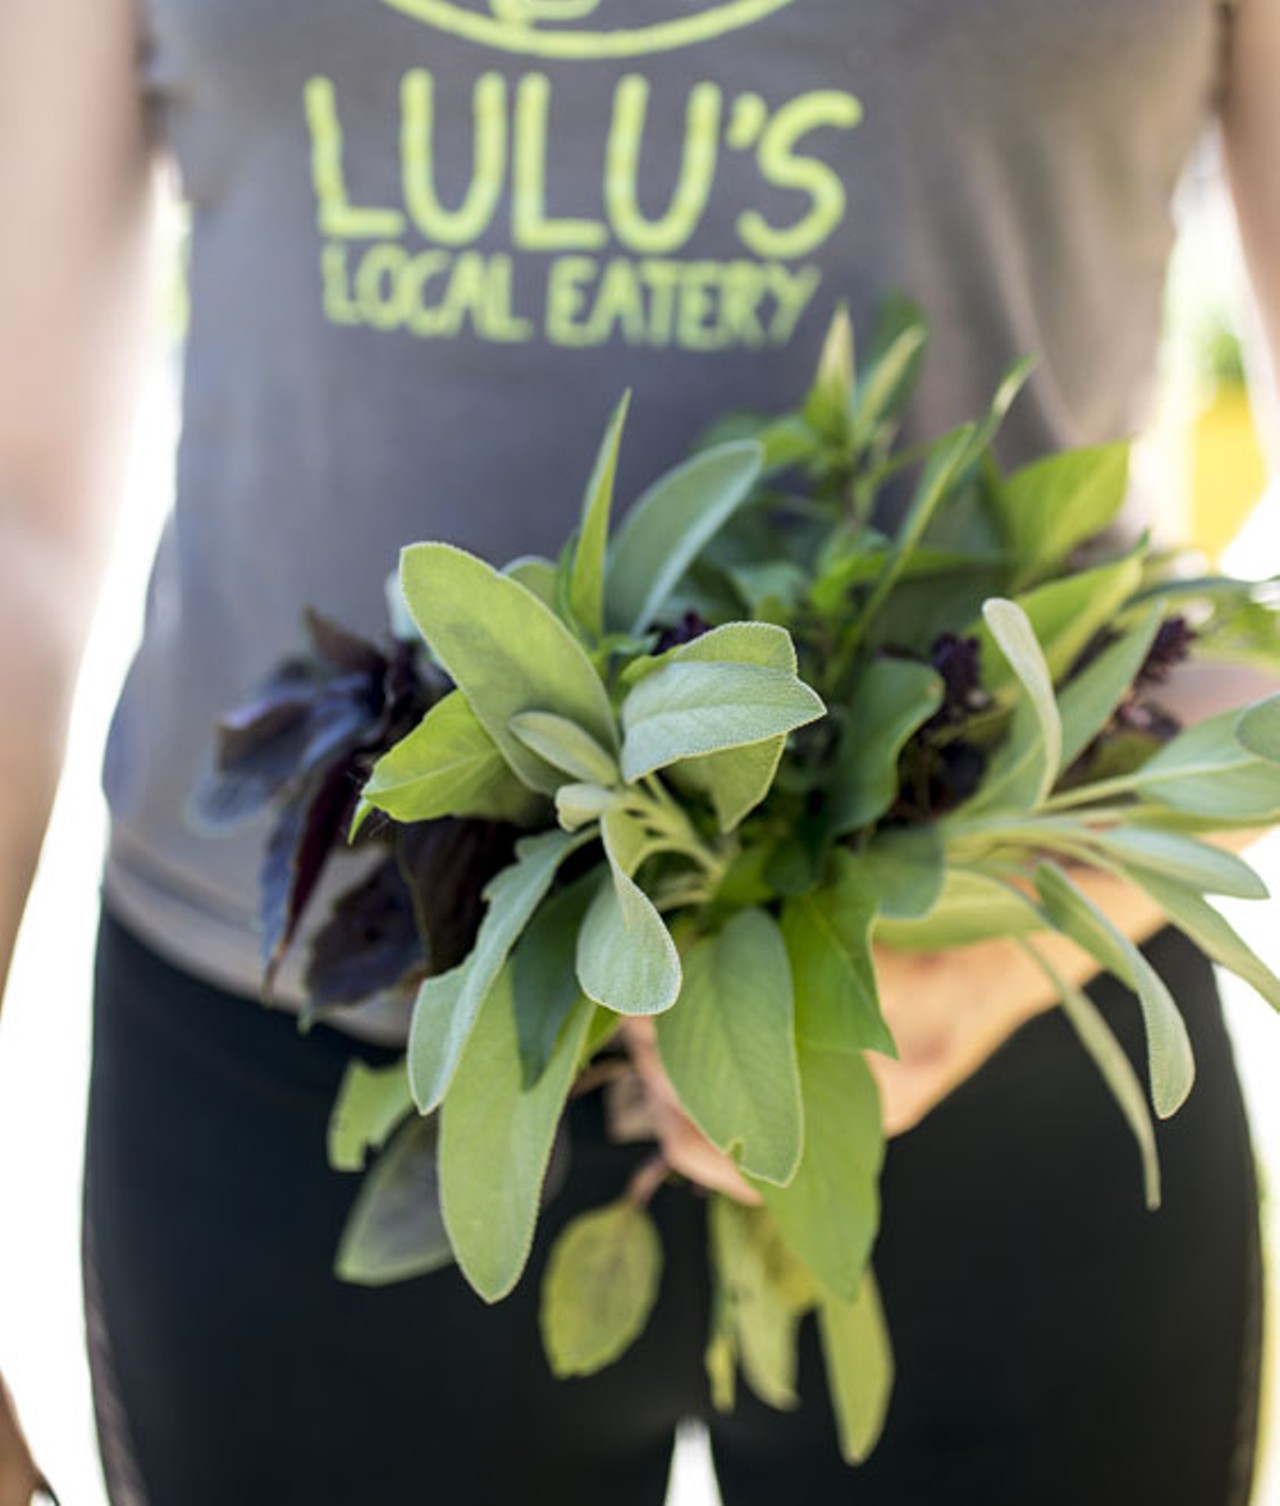 Herbs from Lulu's patio garden, freshly cut for centerpieces.